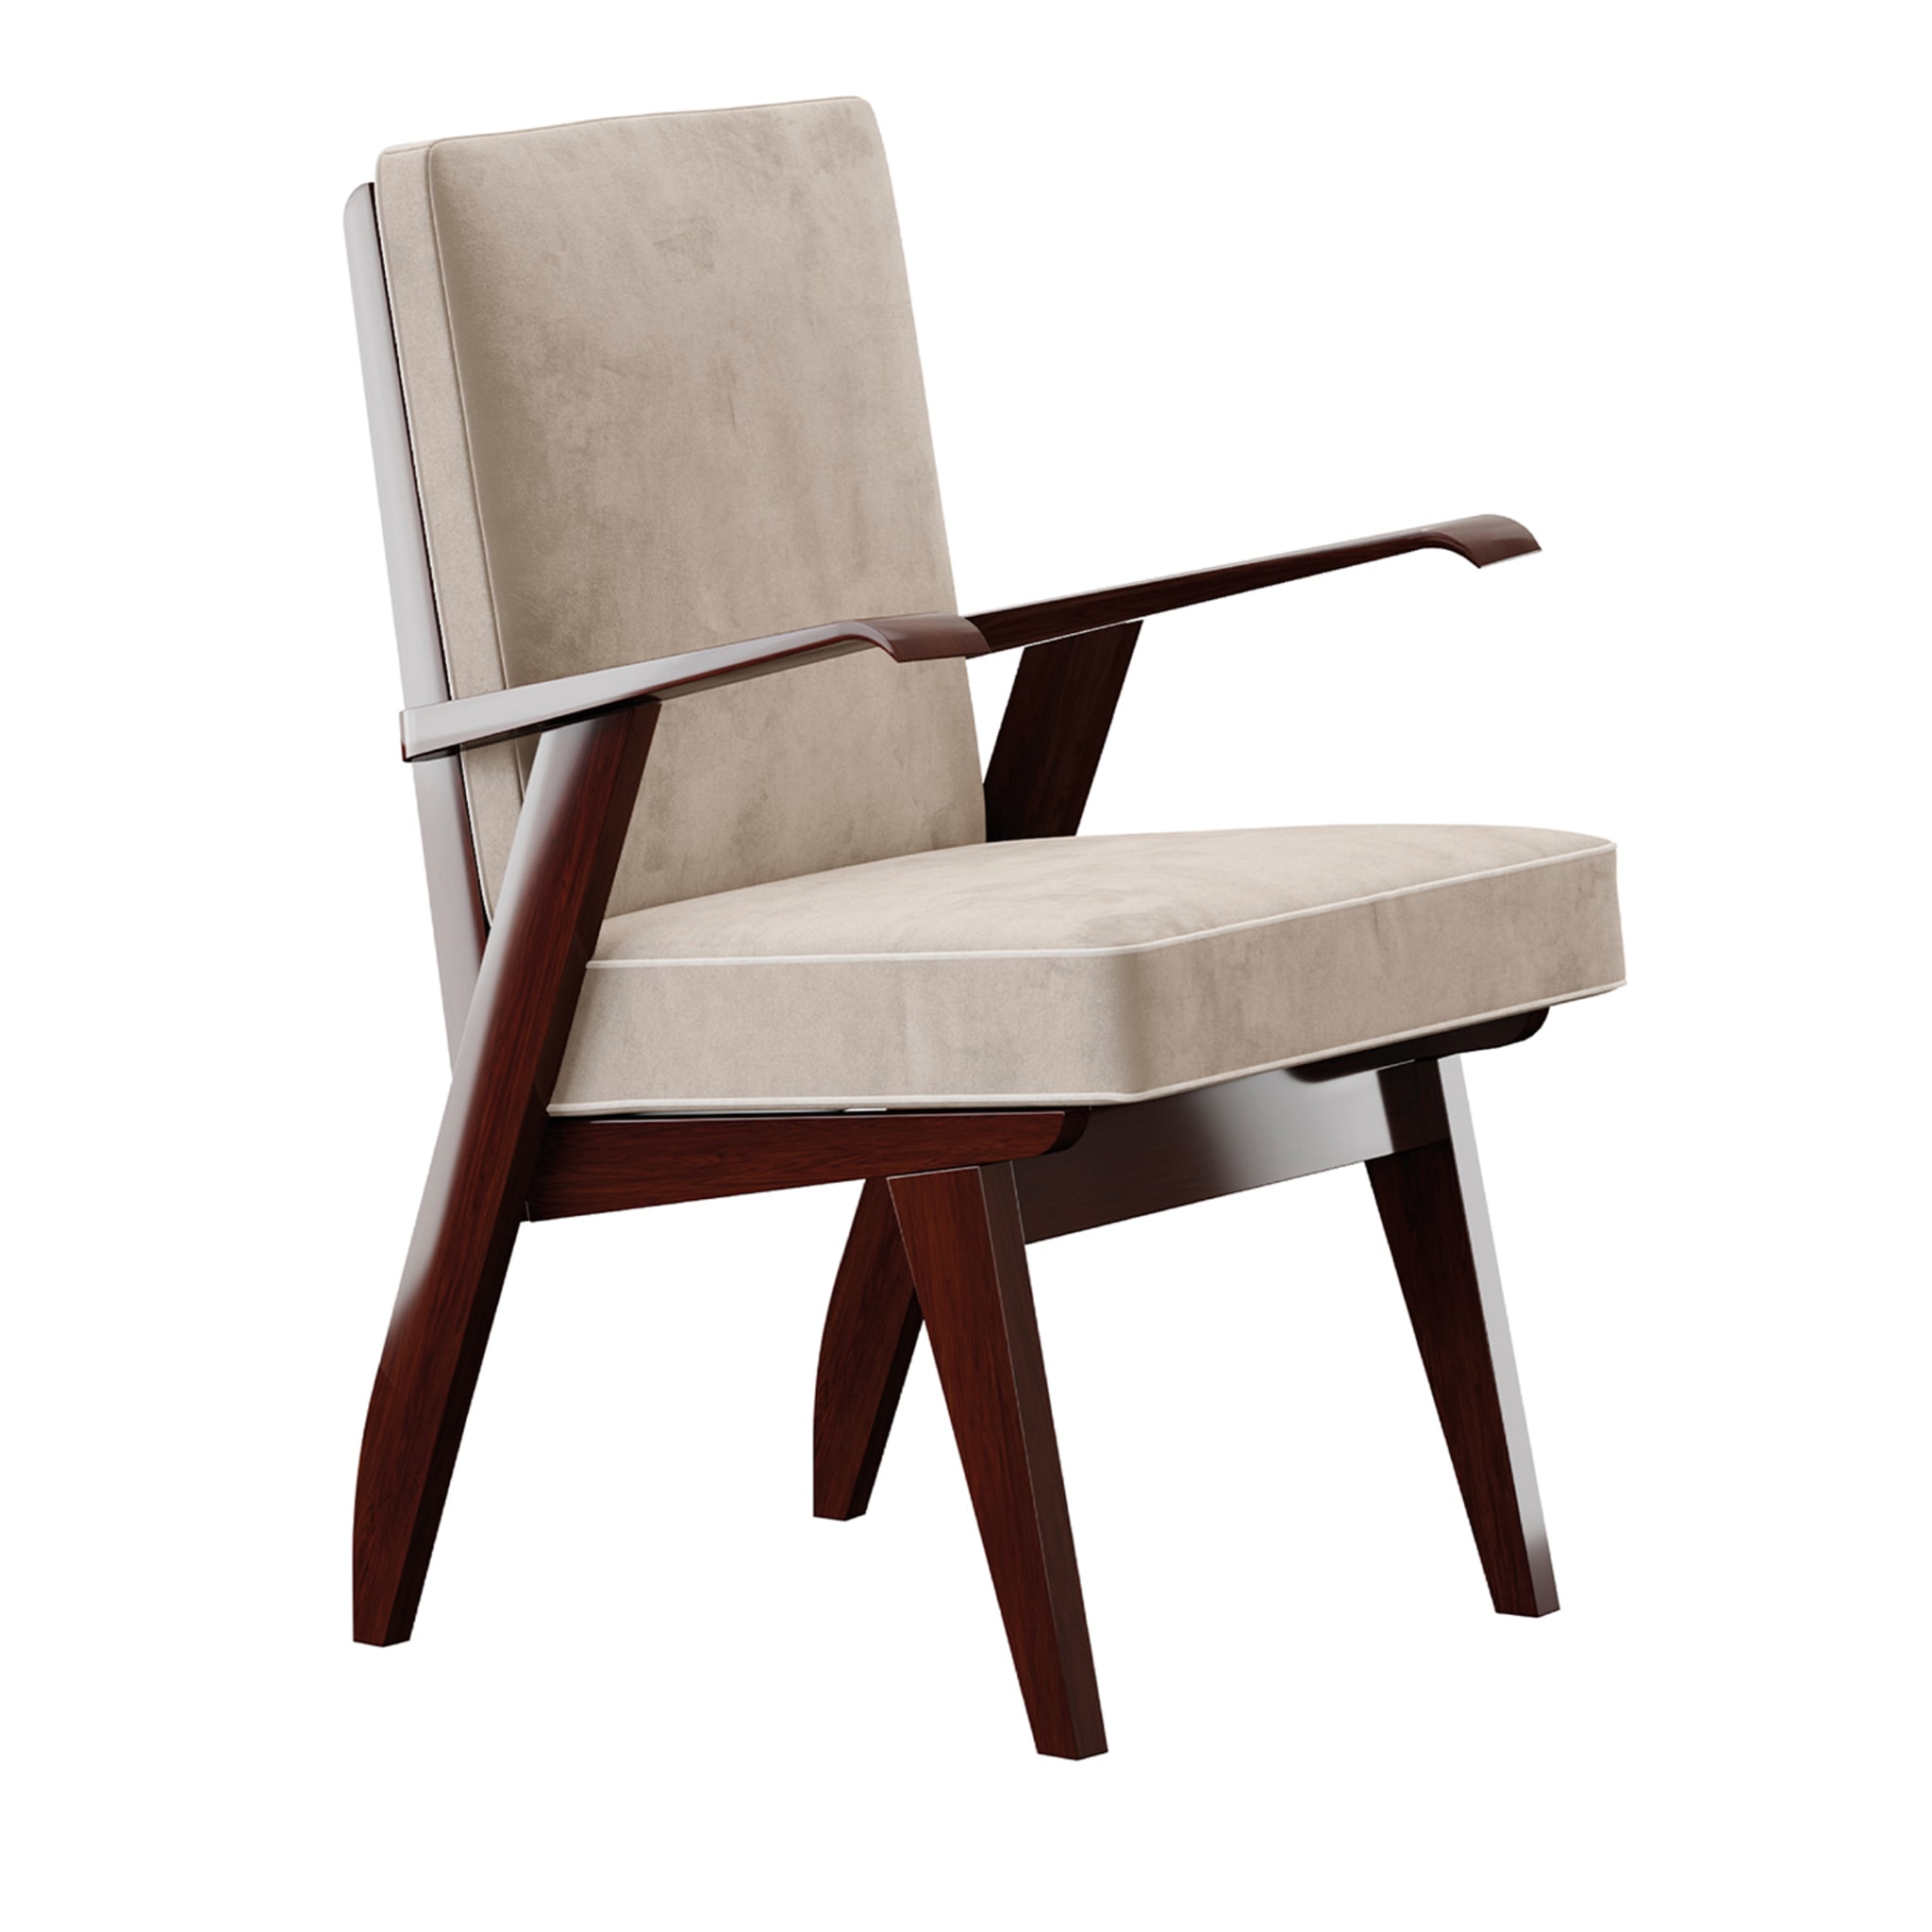 CHRIS Chair with armrests - Main view